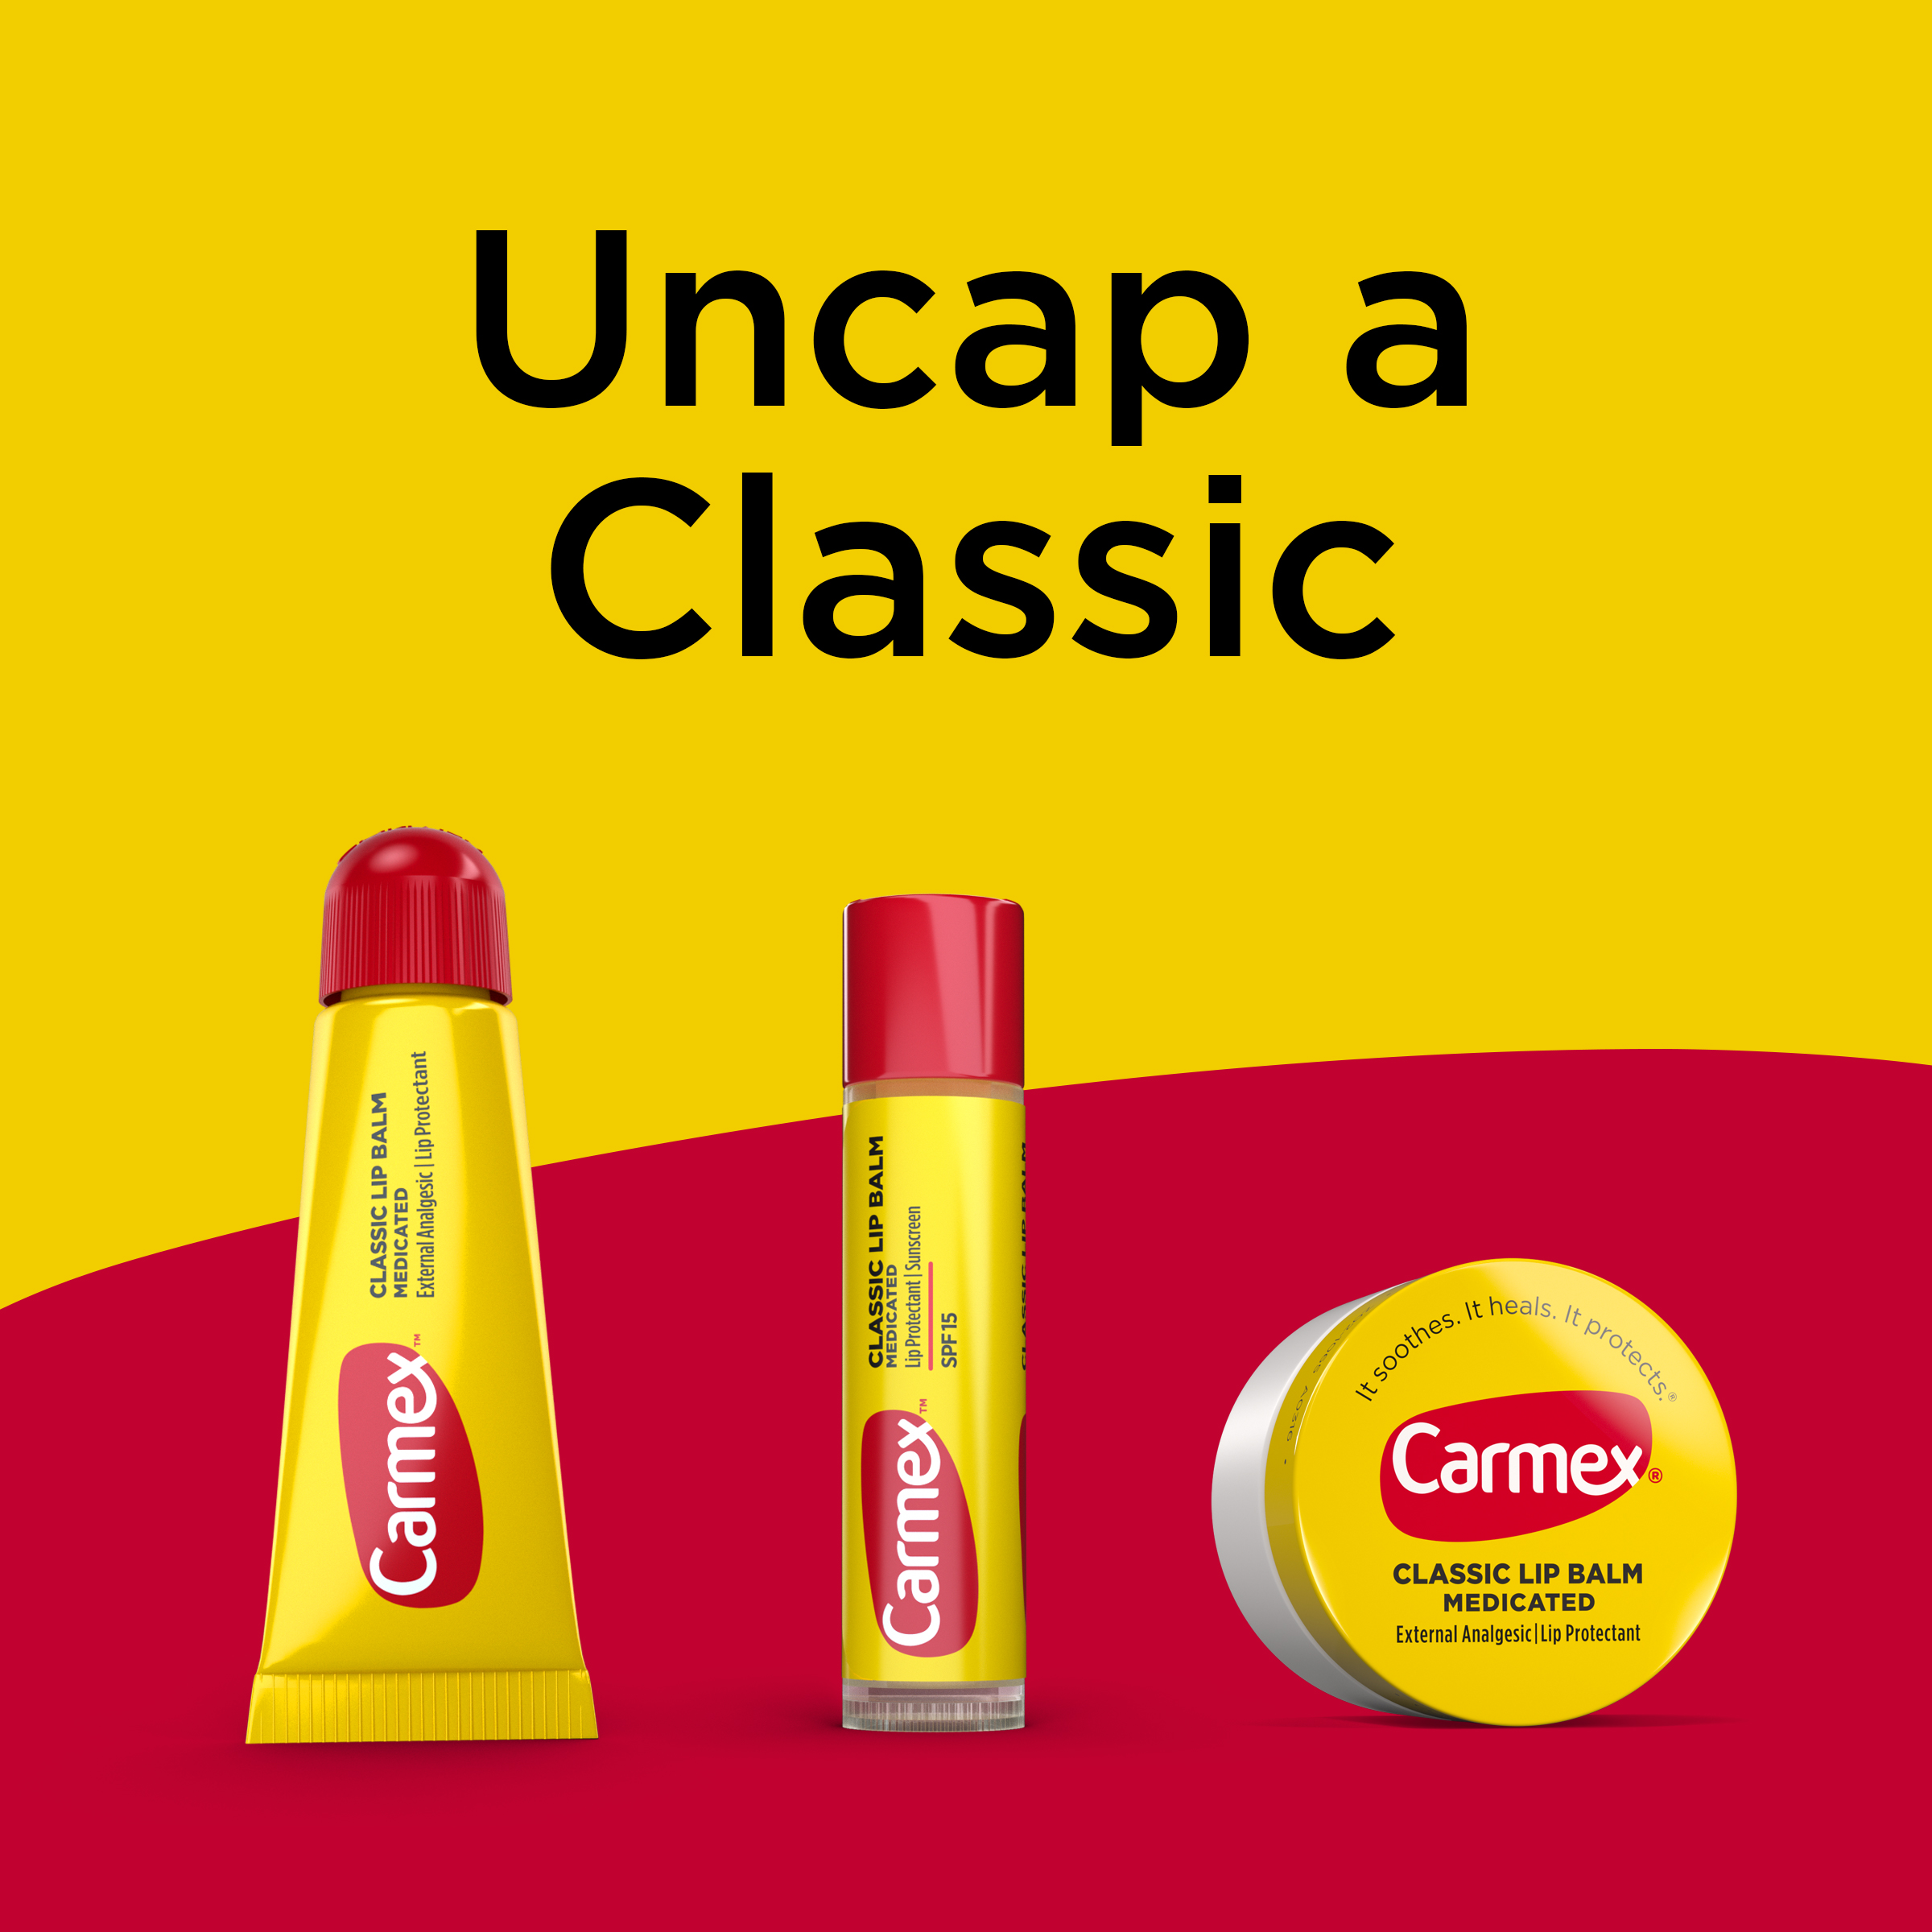 Carmex Medicated Lip Balm Limited Edition Holiday Jars, Lip Moisturizer for Dry, Chapped Lips, 0.25 OZ -3 Count - image 3 of 10